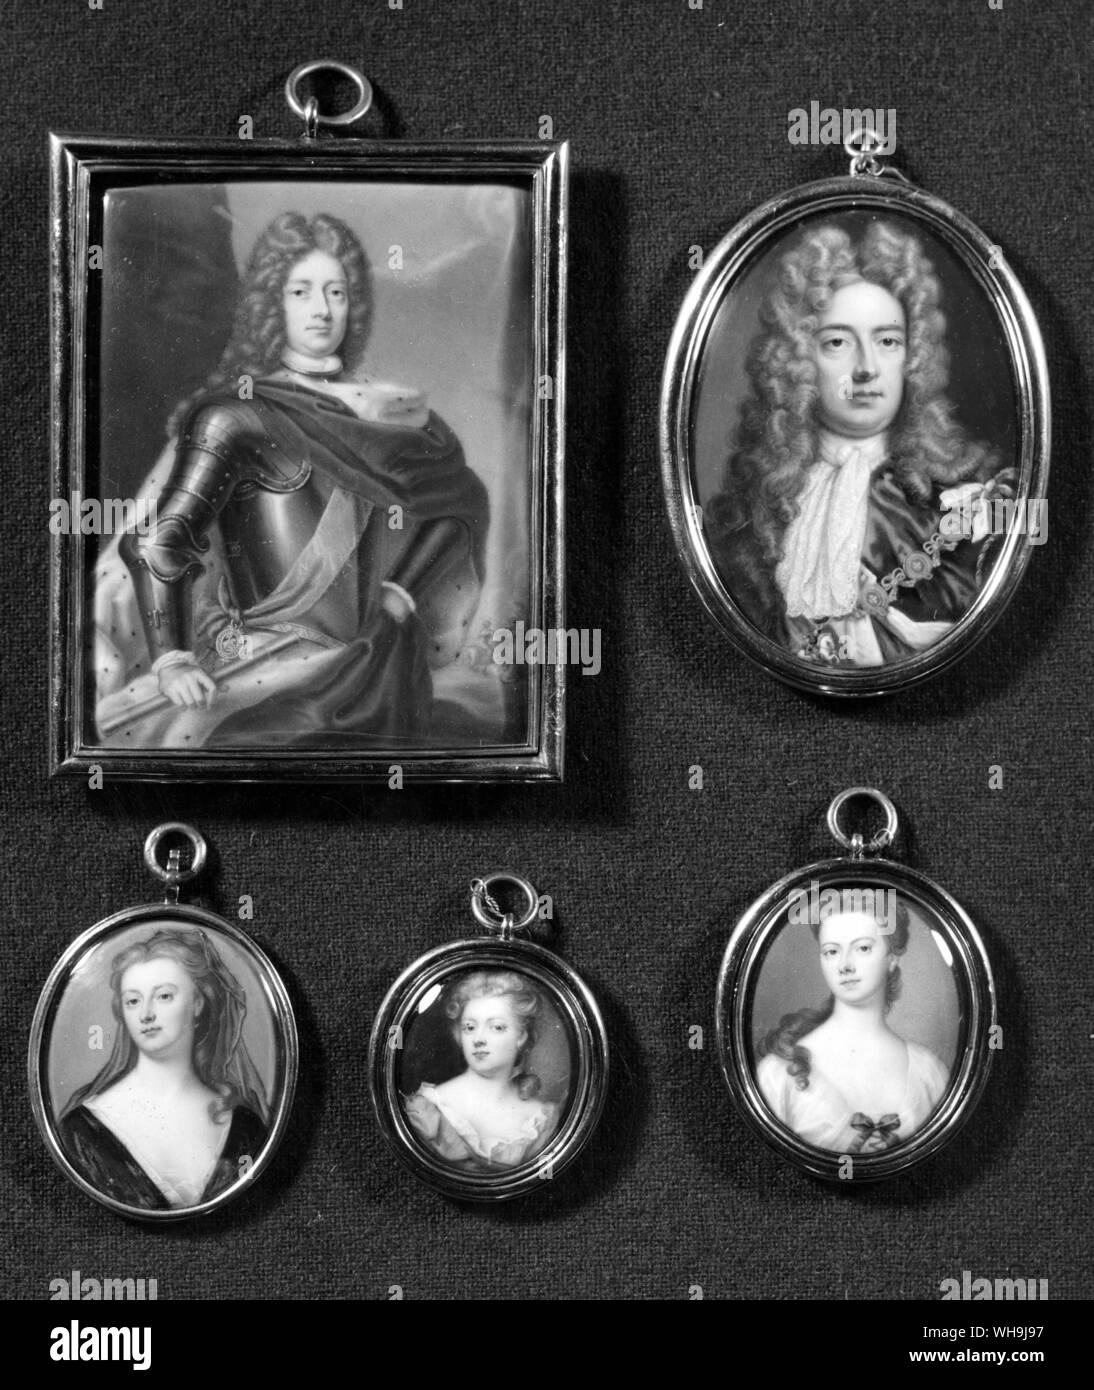 1st Duke and Duchess of Althorp (?). The Spencers. Stock Photo